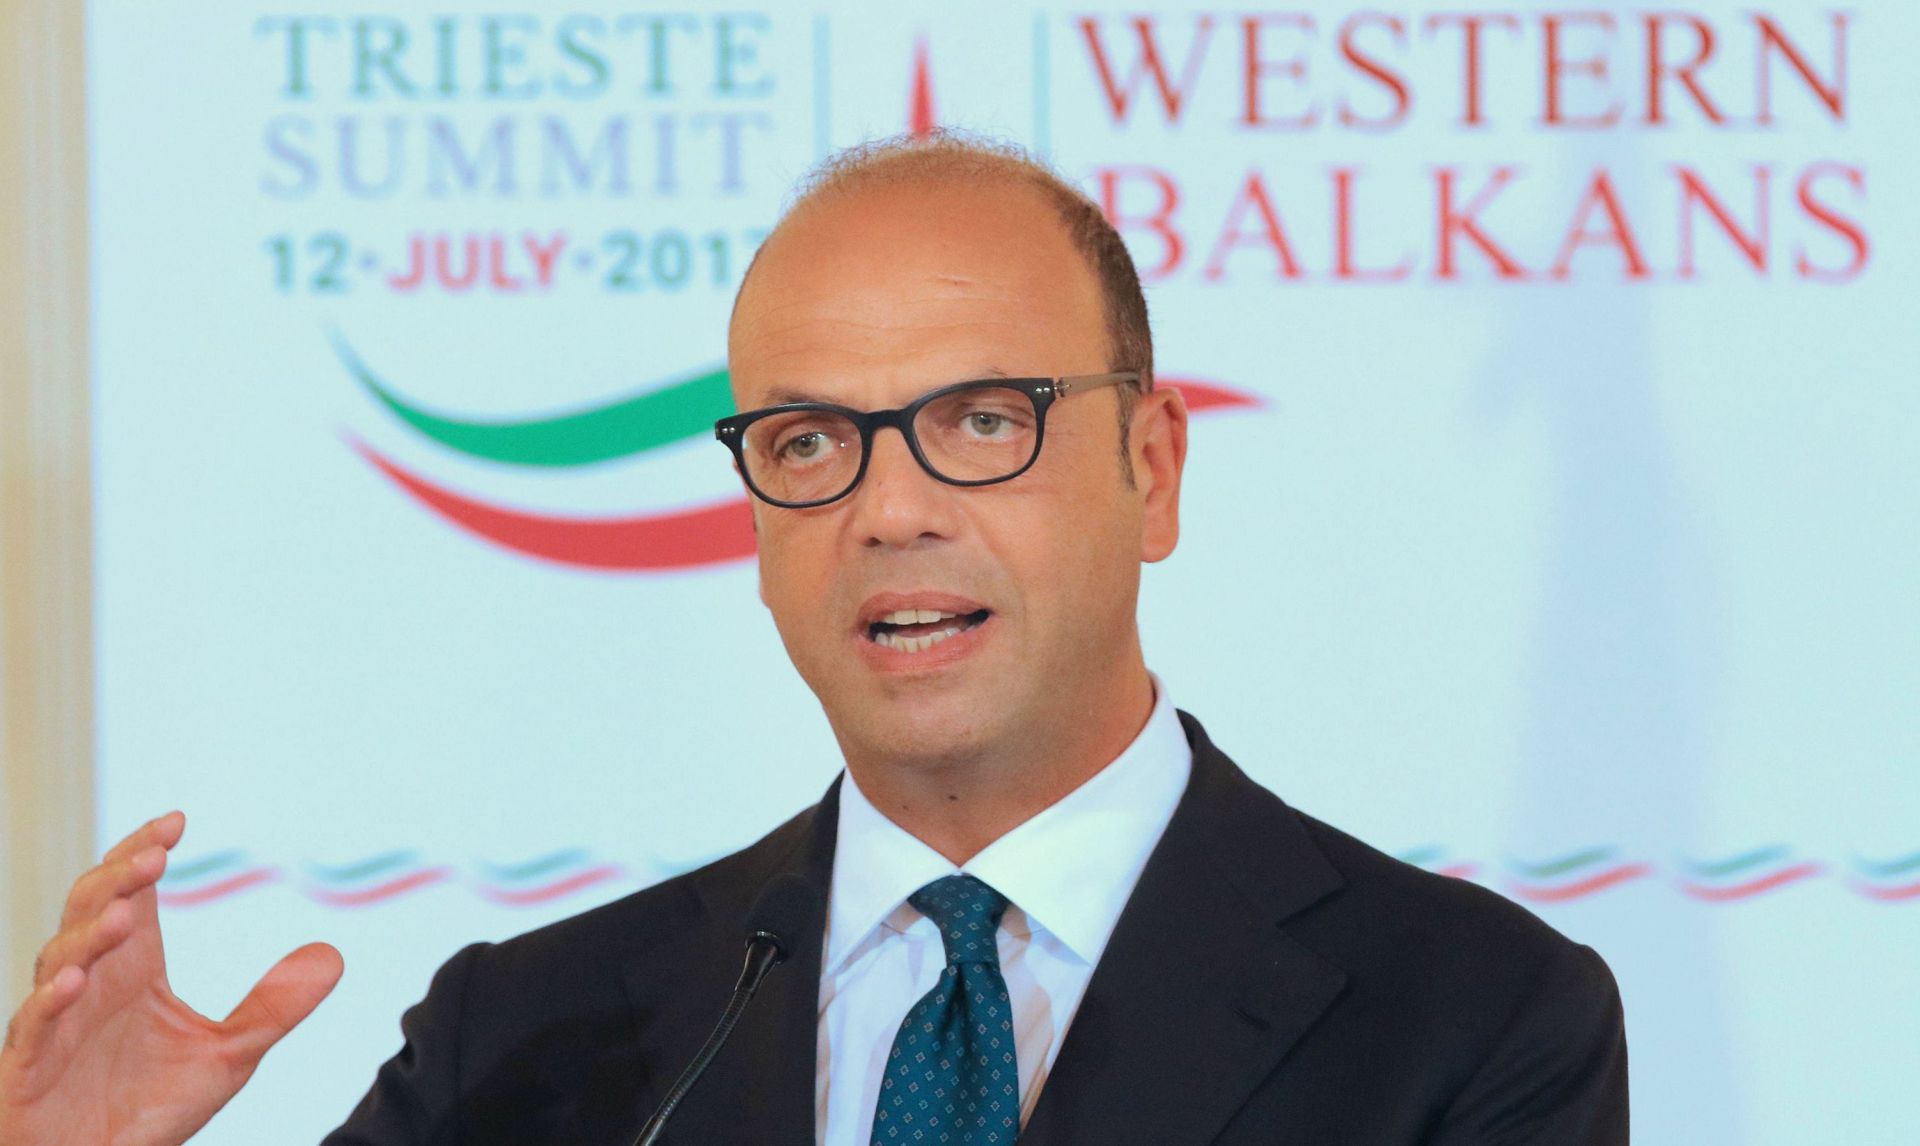 epa06081728 Italian Foreign Minister, Angelino Alfano, addresses a press conference prior the Western Balkans Meeting in Trieste, Italy, 11 July 2017. Heads of government, foreign ministers and economic ministers of the Balkans and EU members states are attending the meeting. Key issues at the meeting are expected to include laying foundations for a common Balkan market and increased regional cooperation.  EPA/ANDREA LASORTE